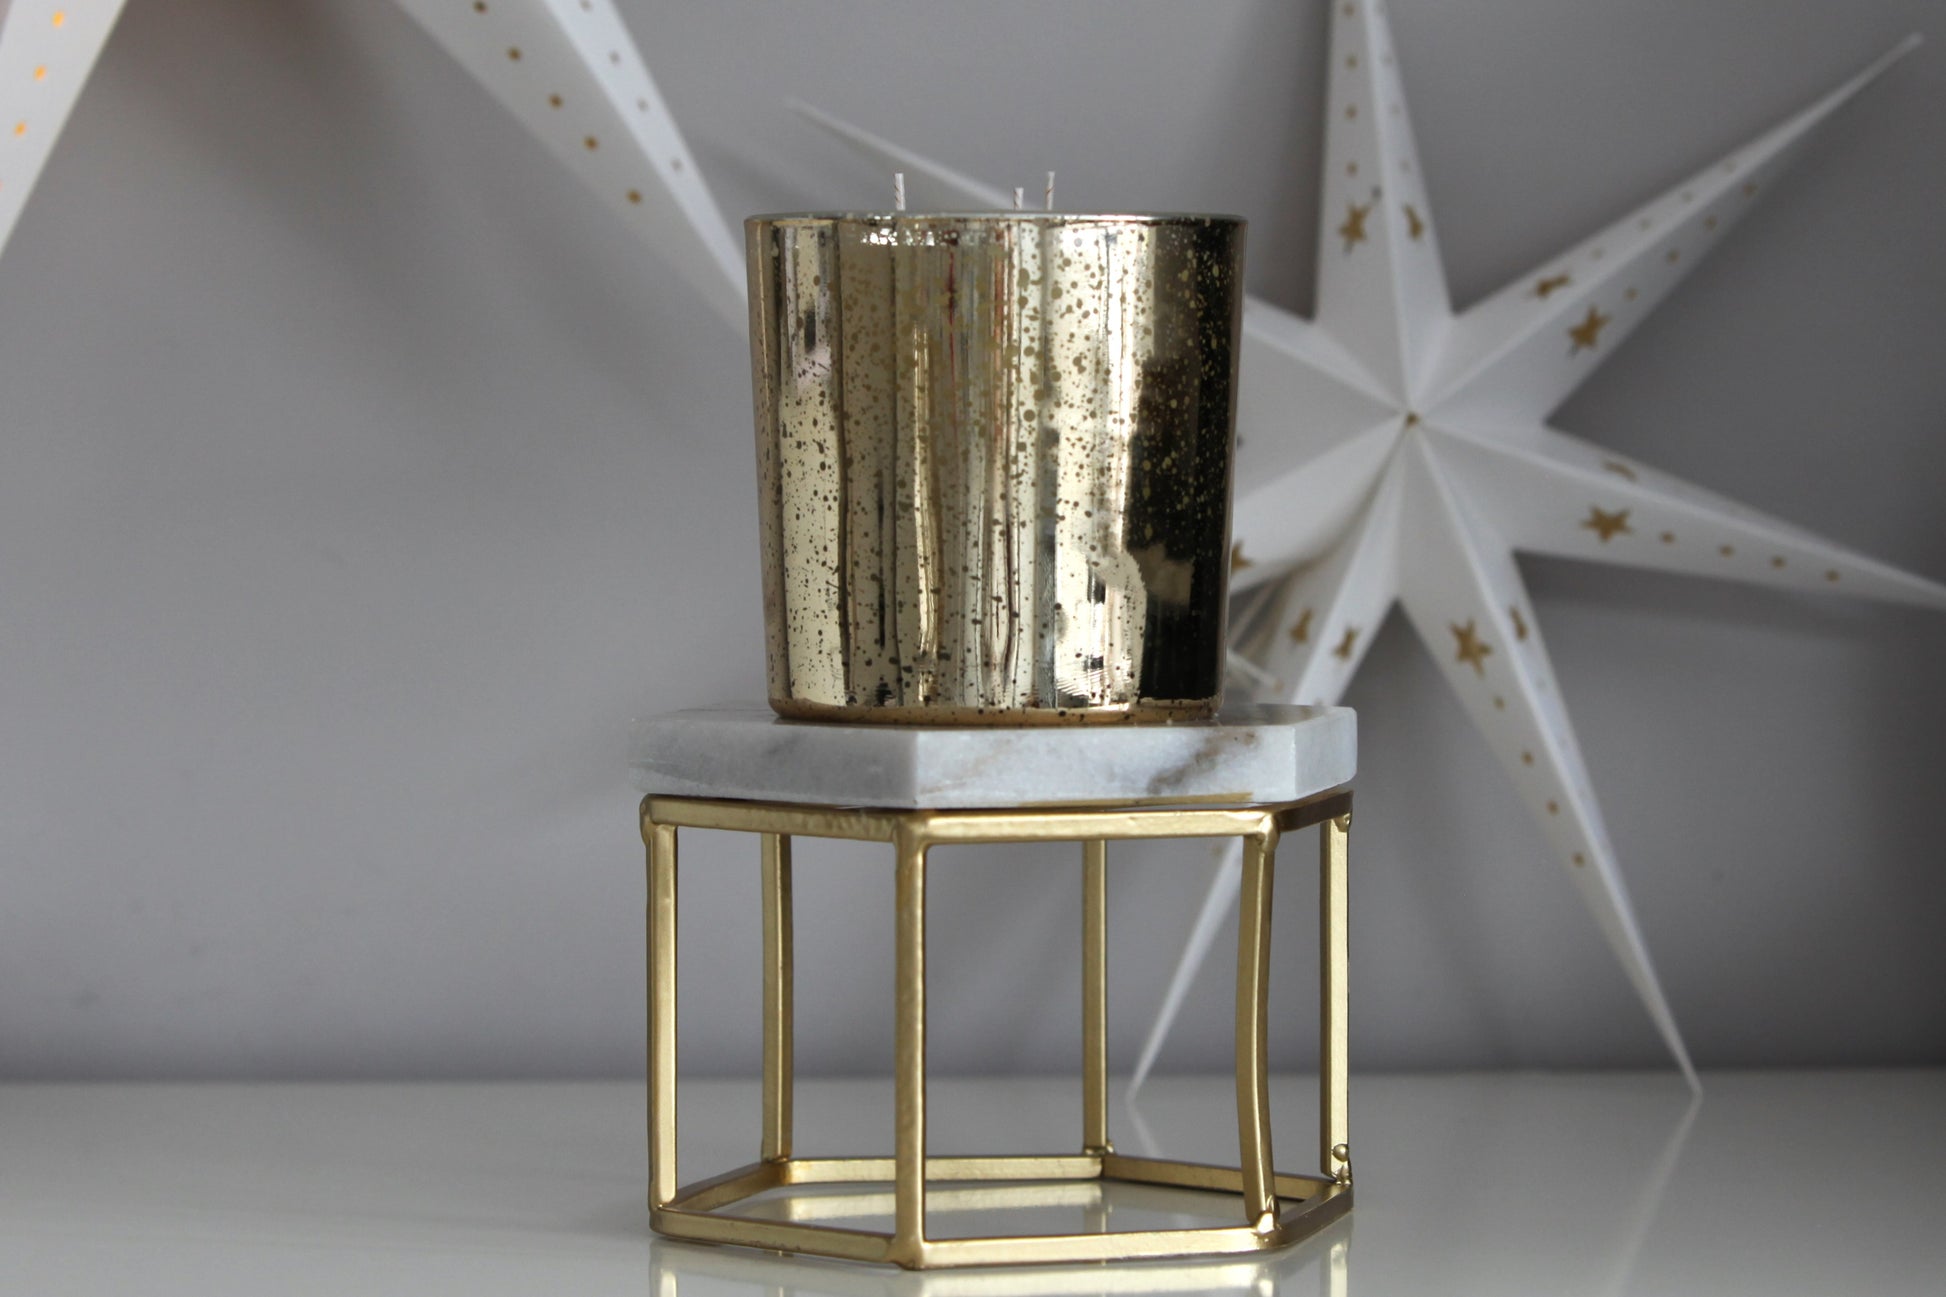 Festive Electroplated Three Wick Candle - Solu Candles